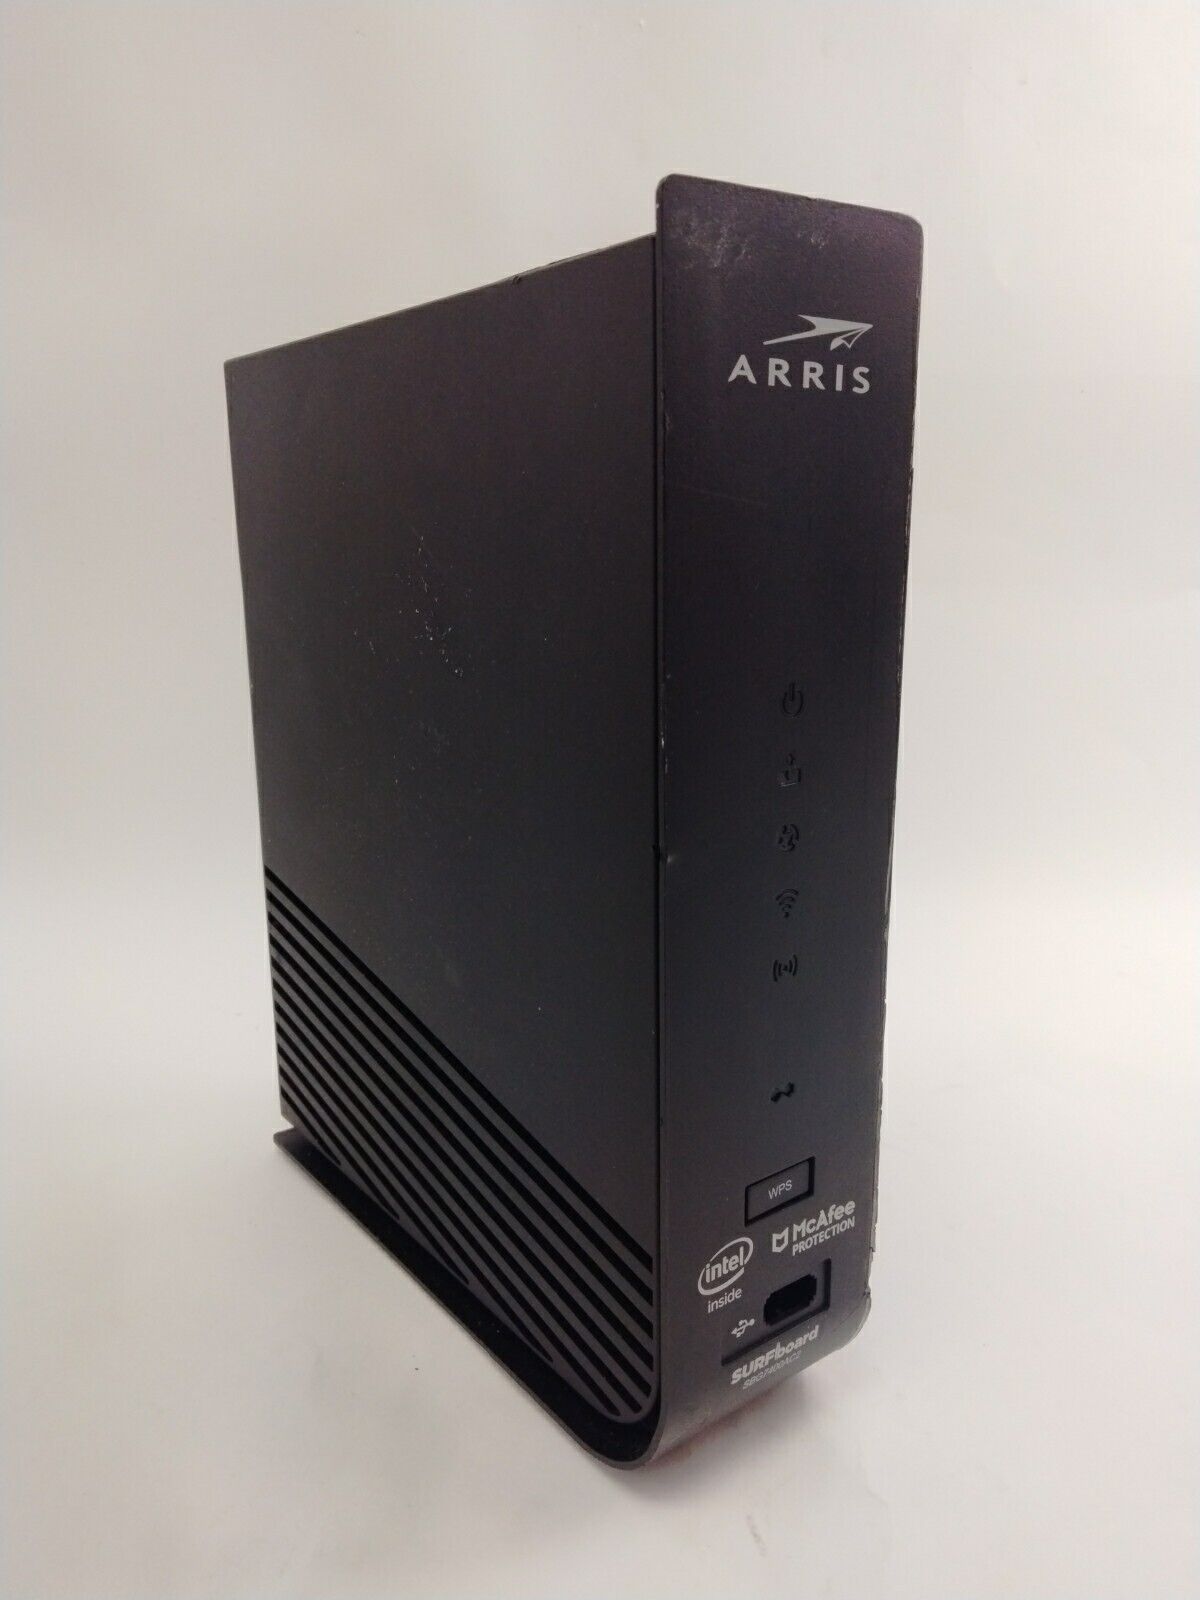 Arris Surfboard SBG7400AC2 Cable Modem/Wi-Fi Router- Please Read 